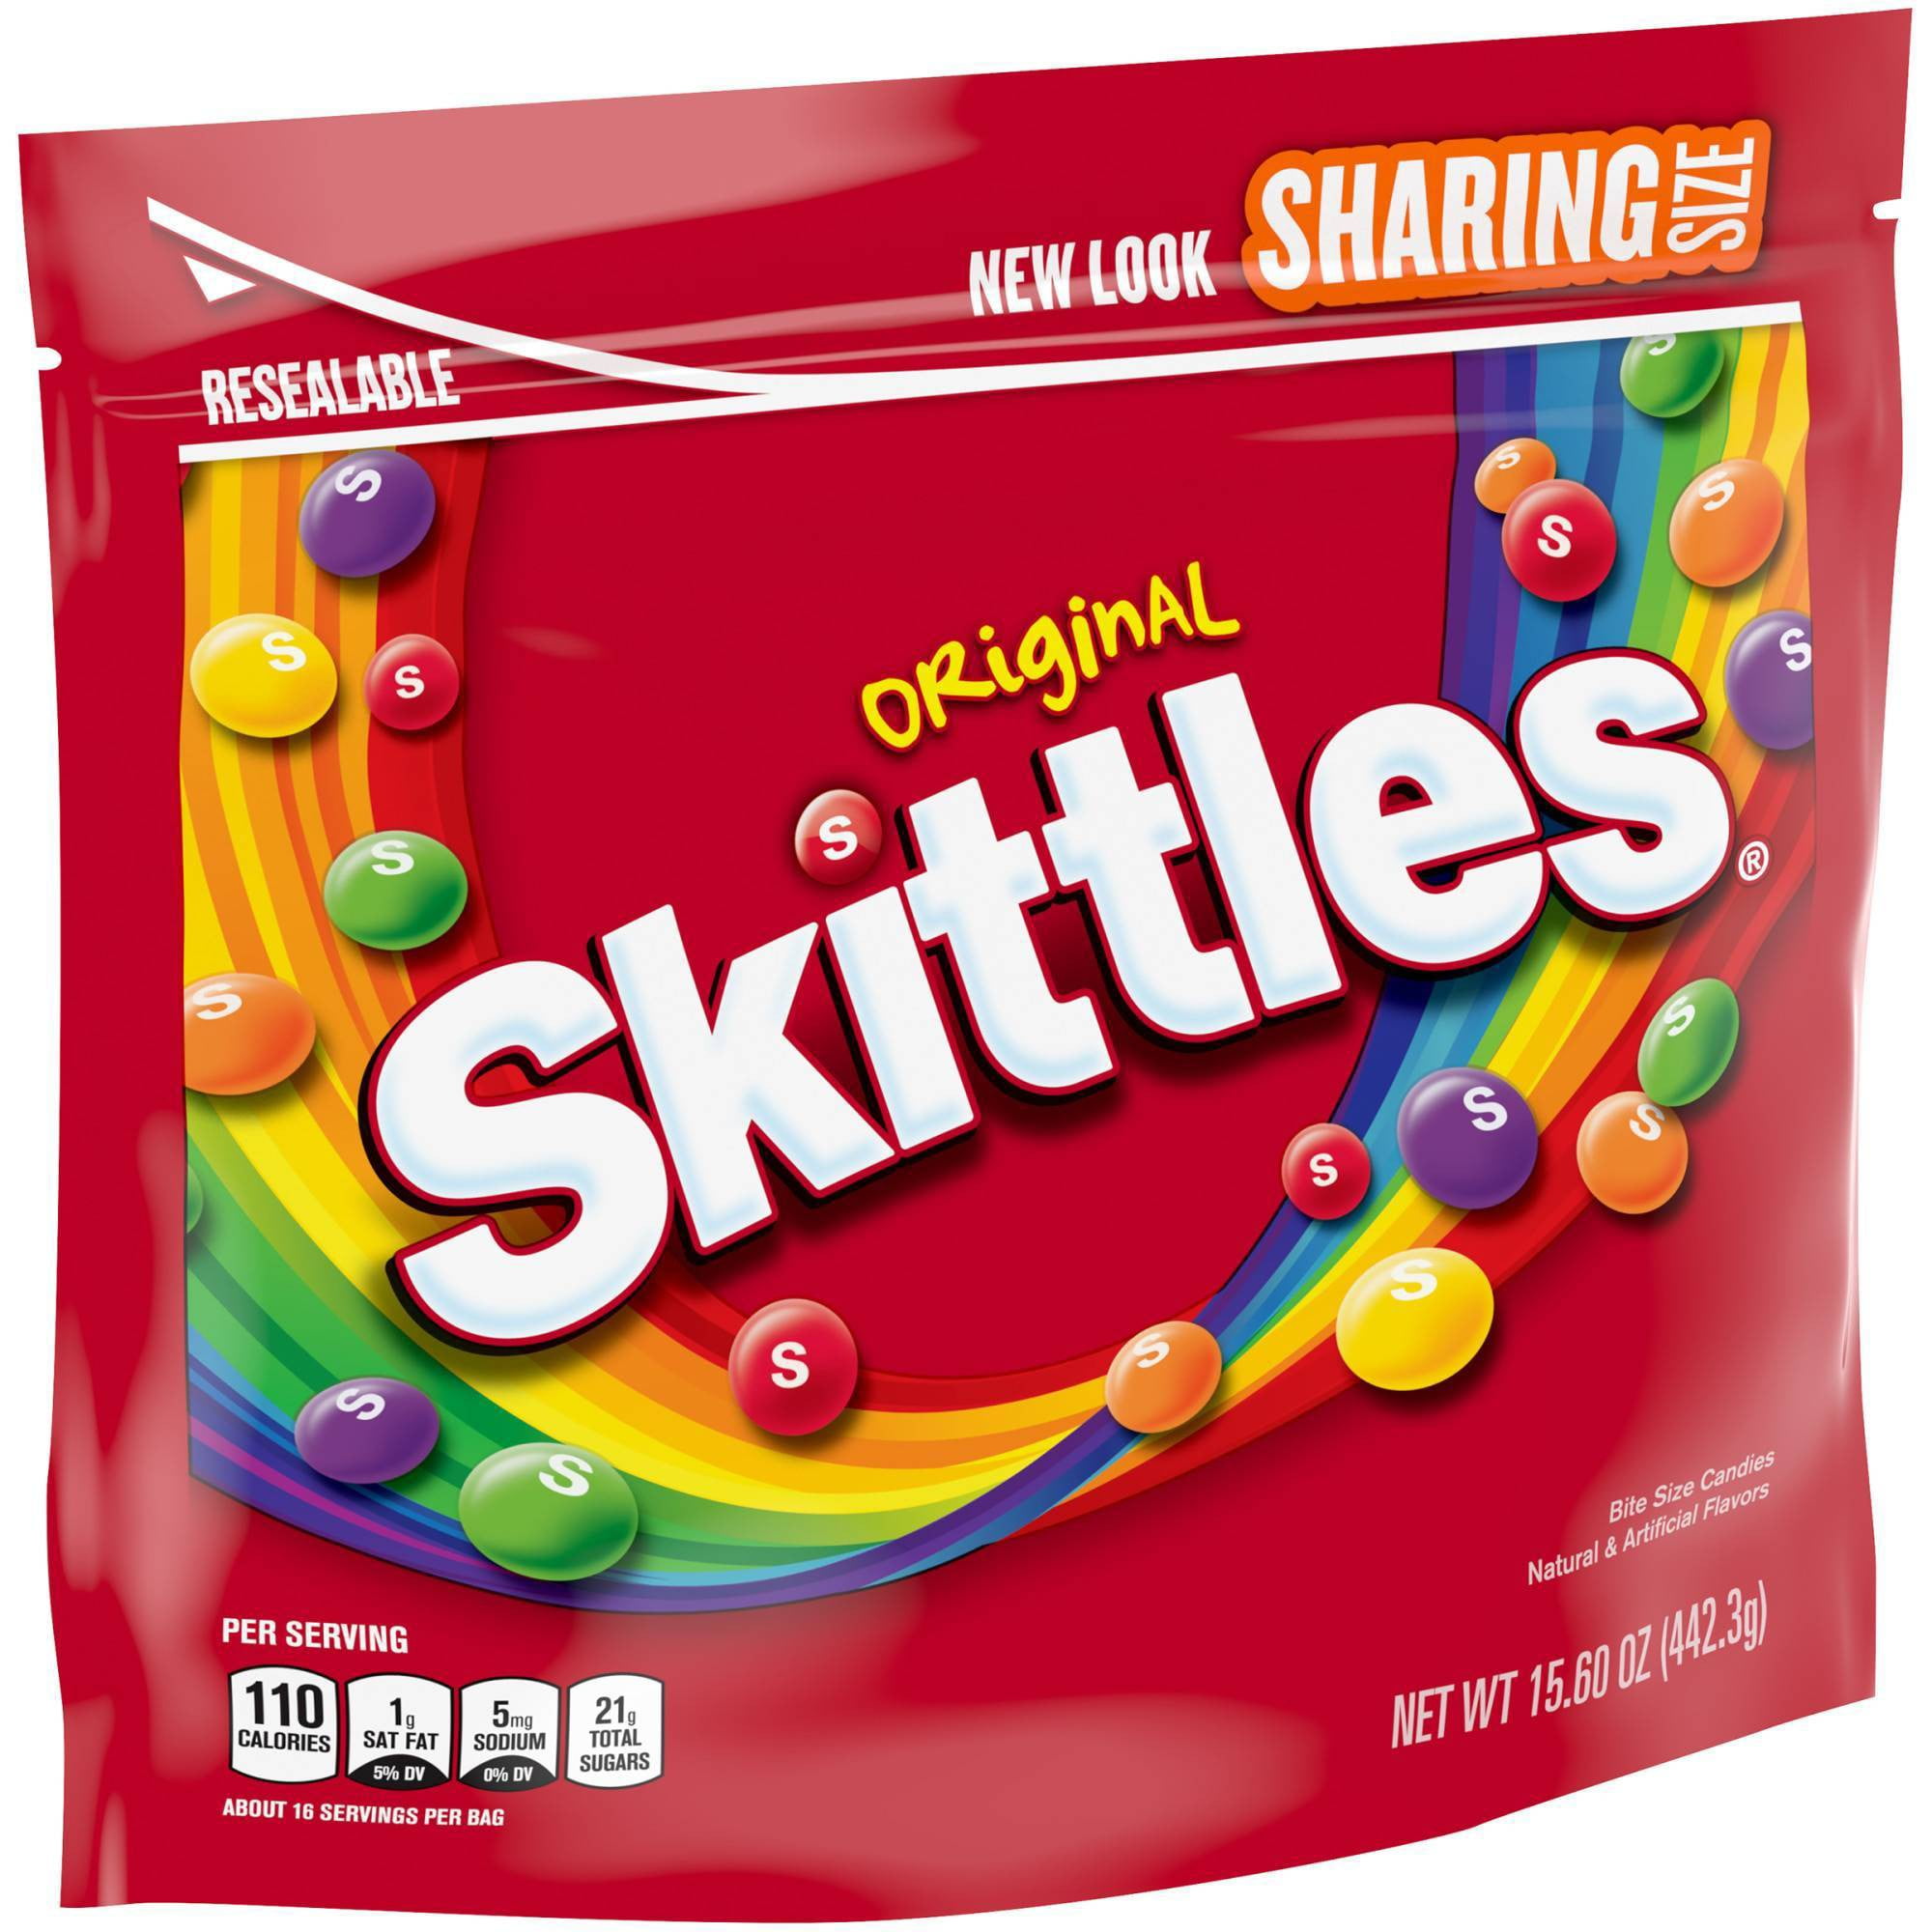 Skittles Original Valentine's Day Sharing Size Chewy Candy , 15.6 oz Bag